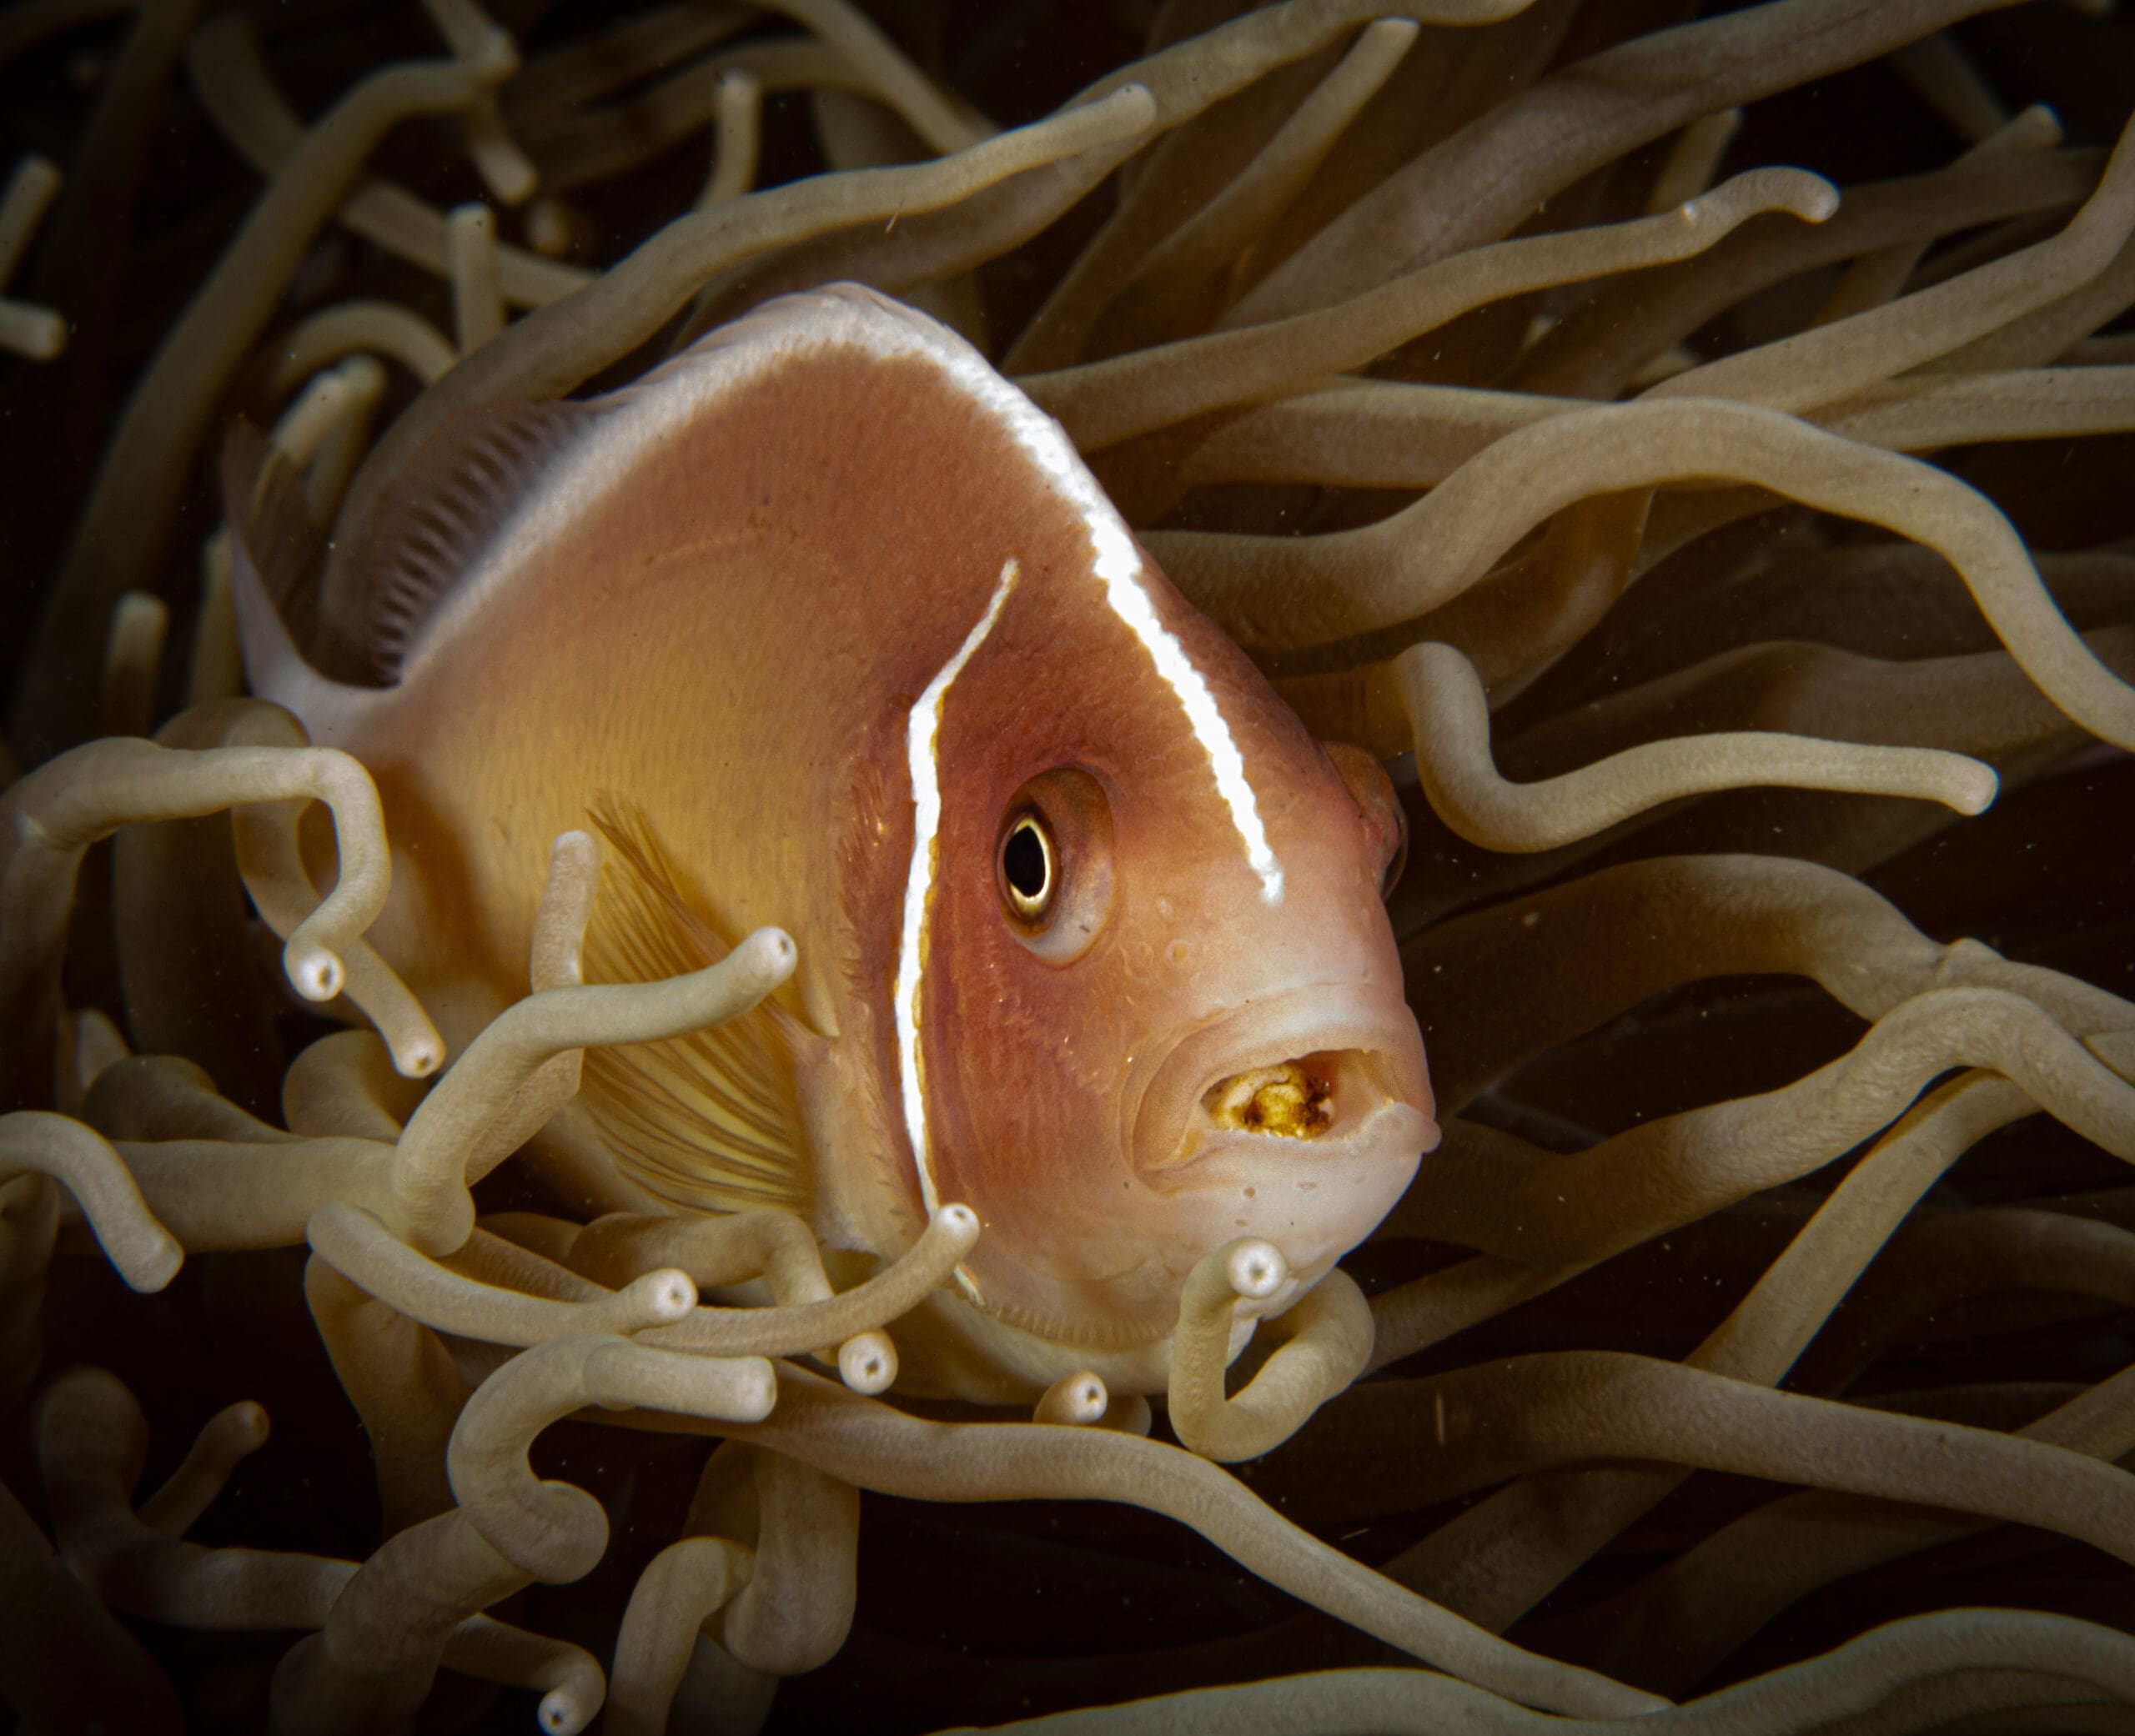 Anemone fish with isopod by participant Andy Hopkins